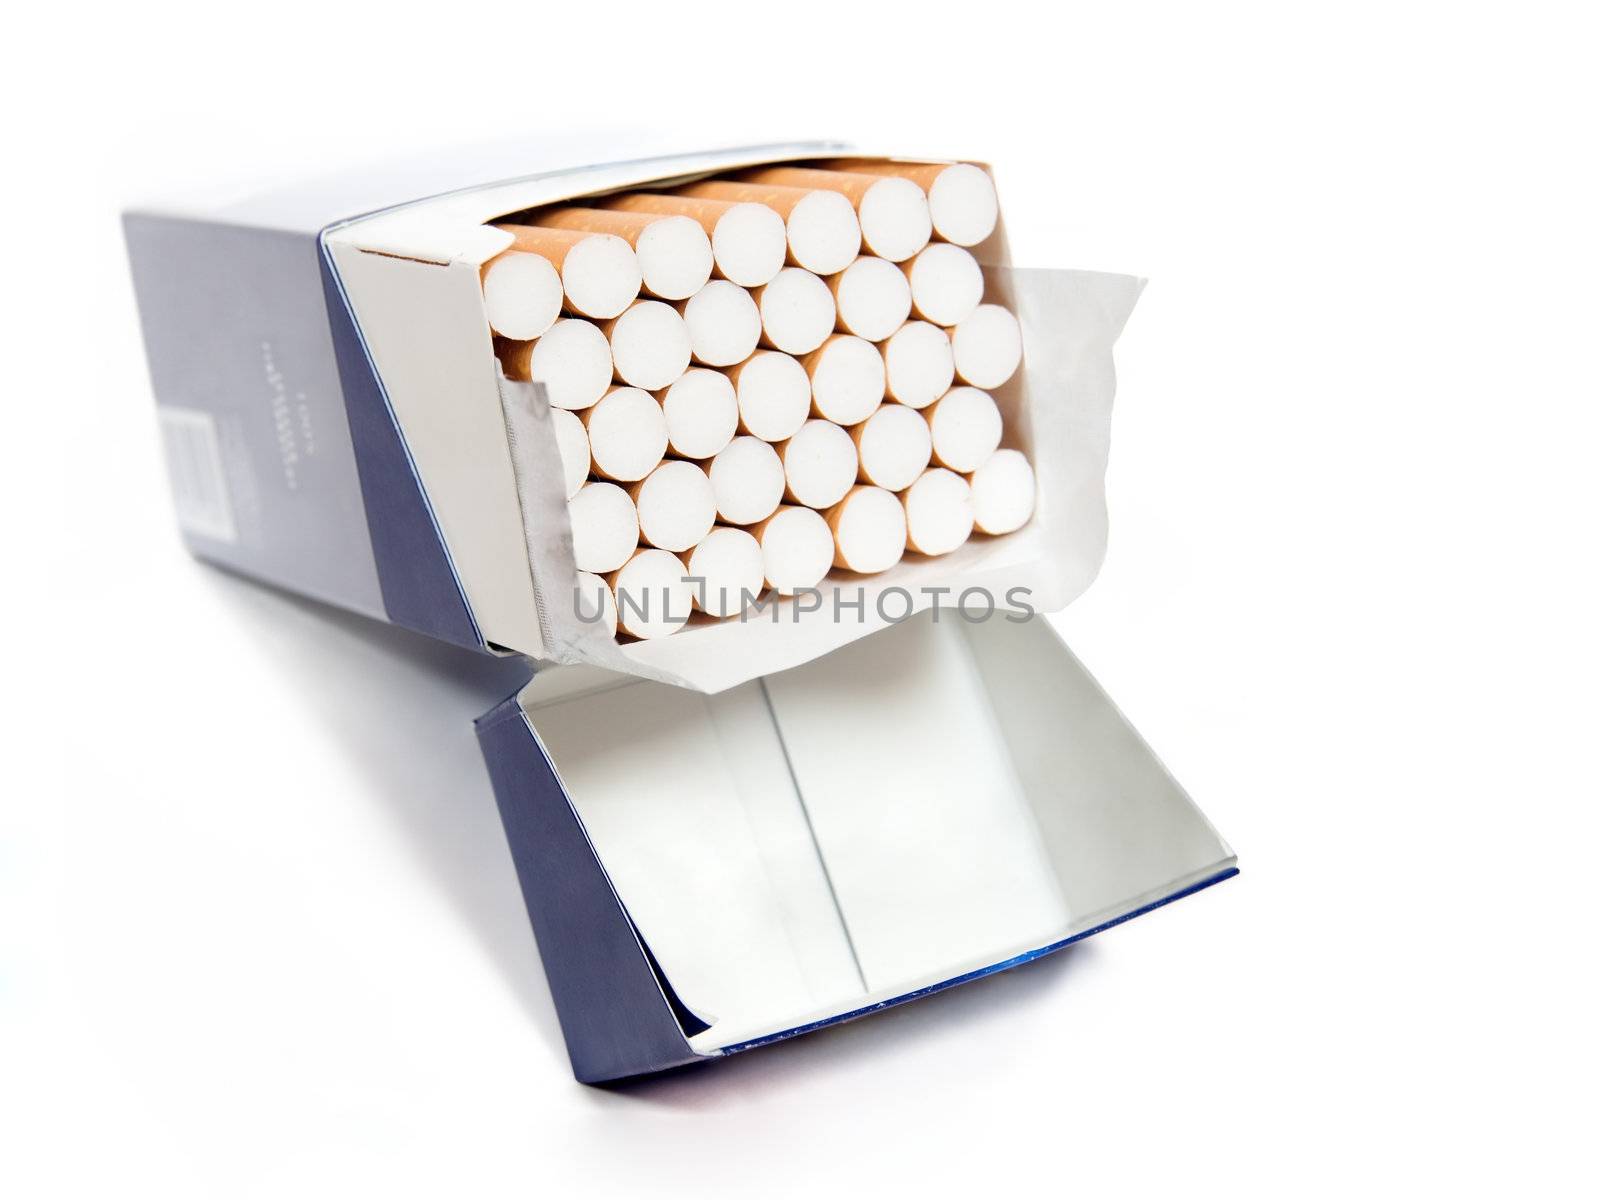 Big pack of cigarettes isolated on white background by milkovasa